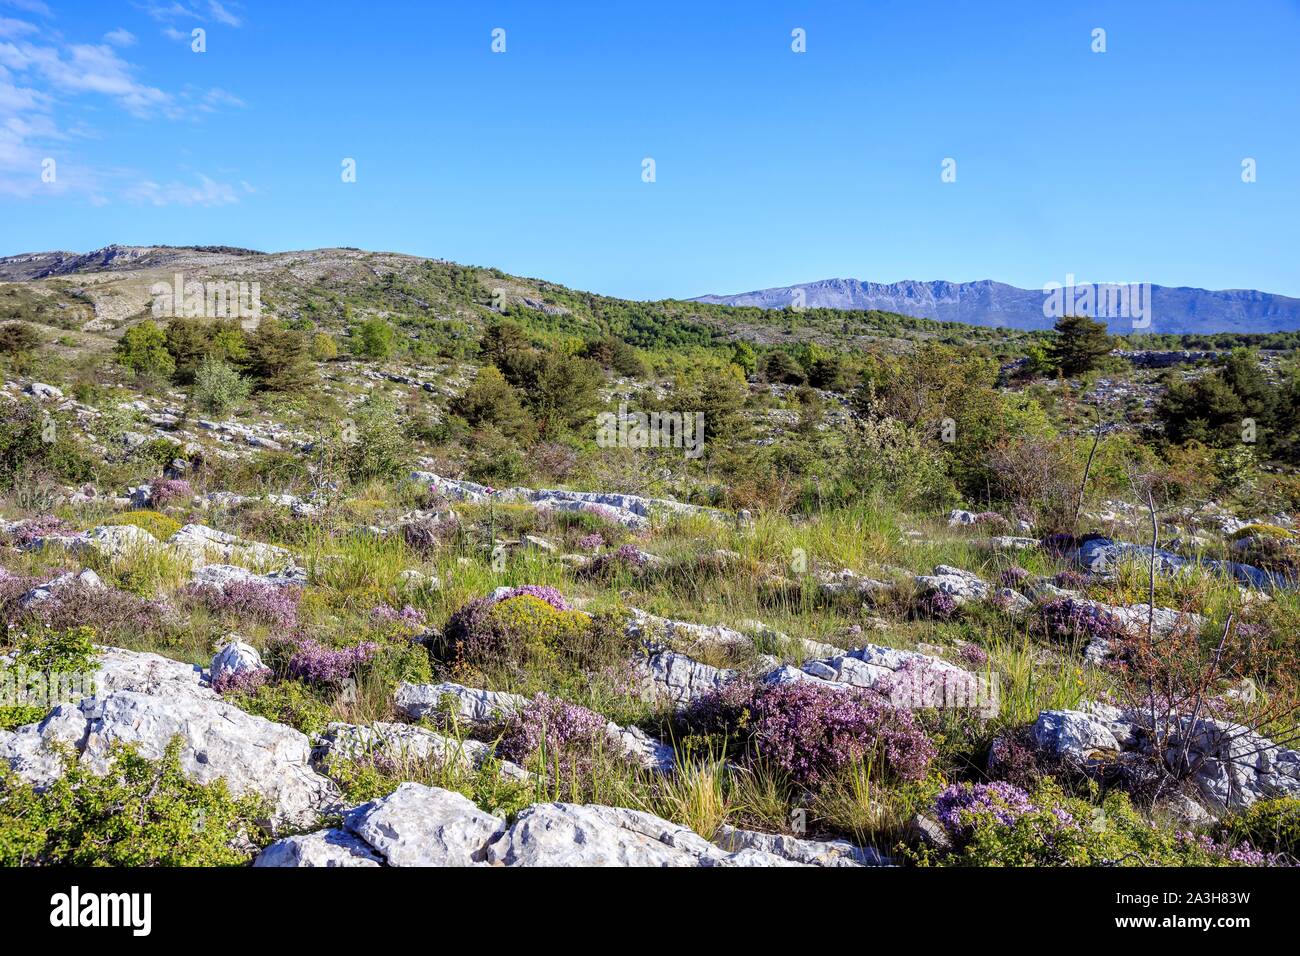 France, Alpes Maritimes, Regional Natural Park of the Prealpes d'Azur, Gourdon, Cavillore plateau, common thyme (Thymus vulgaris) flowering Stock Photo